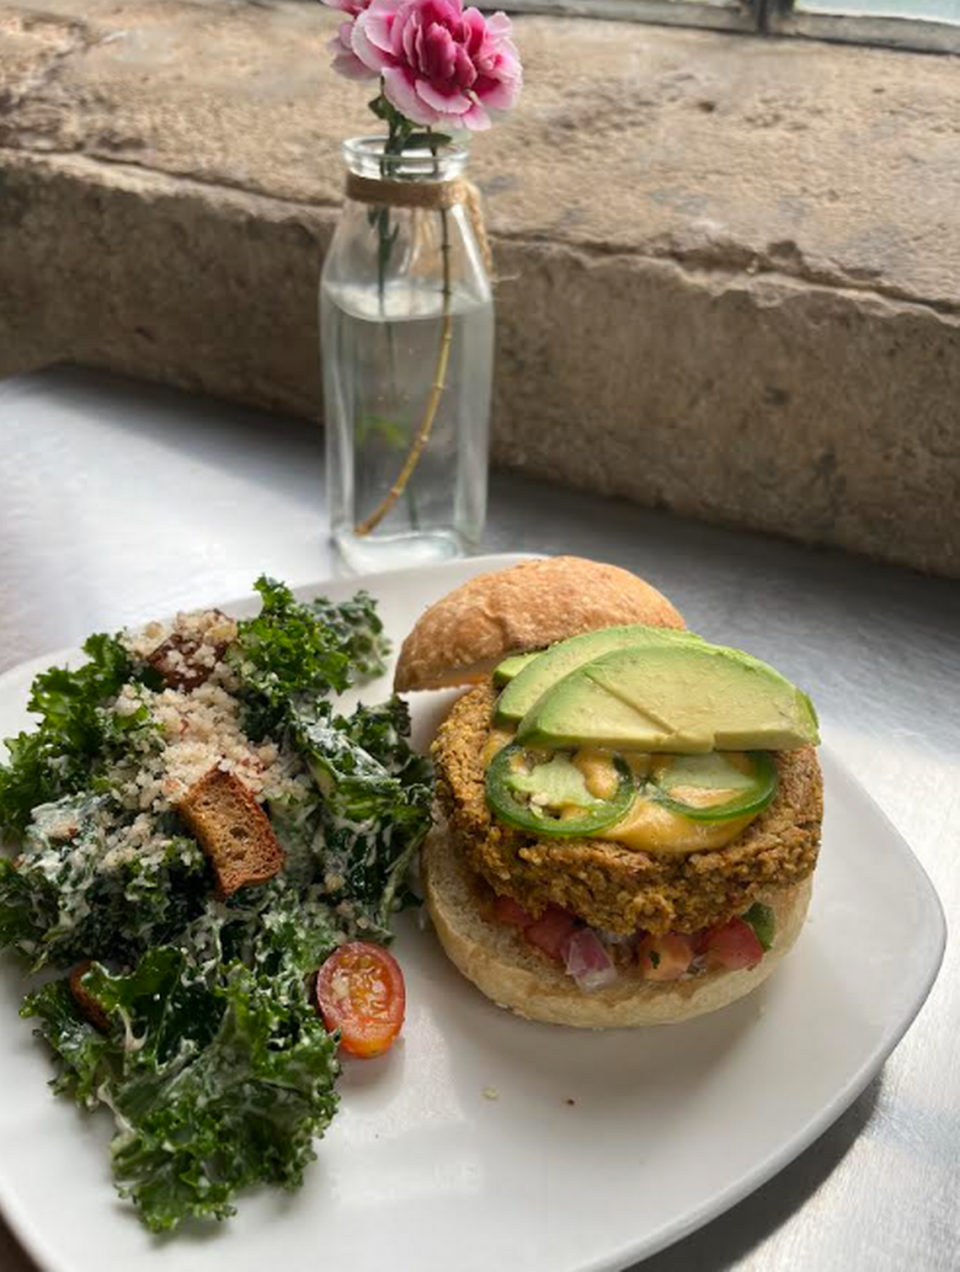 The Nacho Burger from Living Kitchen includes chipotle sunflower seed hummus, avocado, spicy butternut squash queso, pico de gallo and jalapenos. 